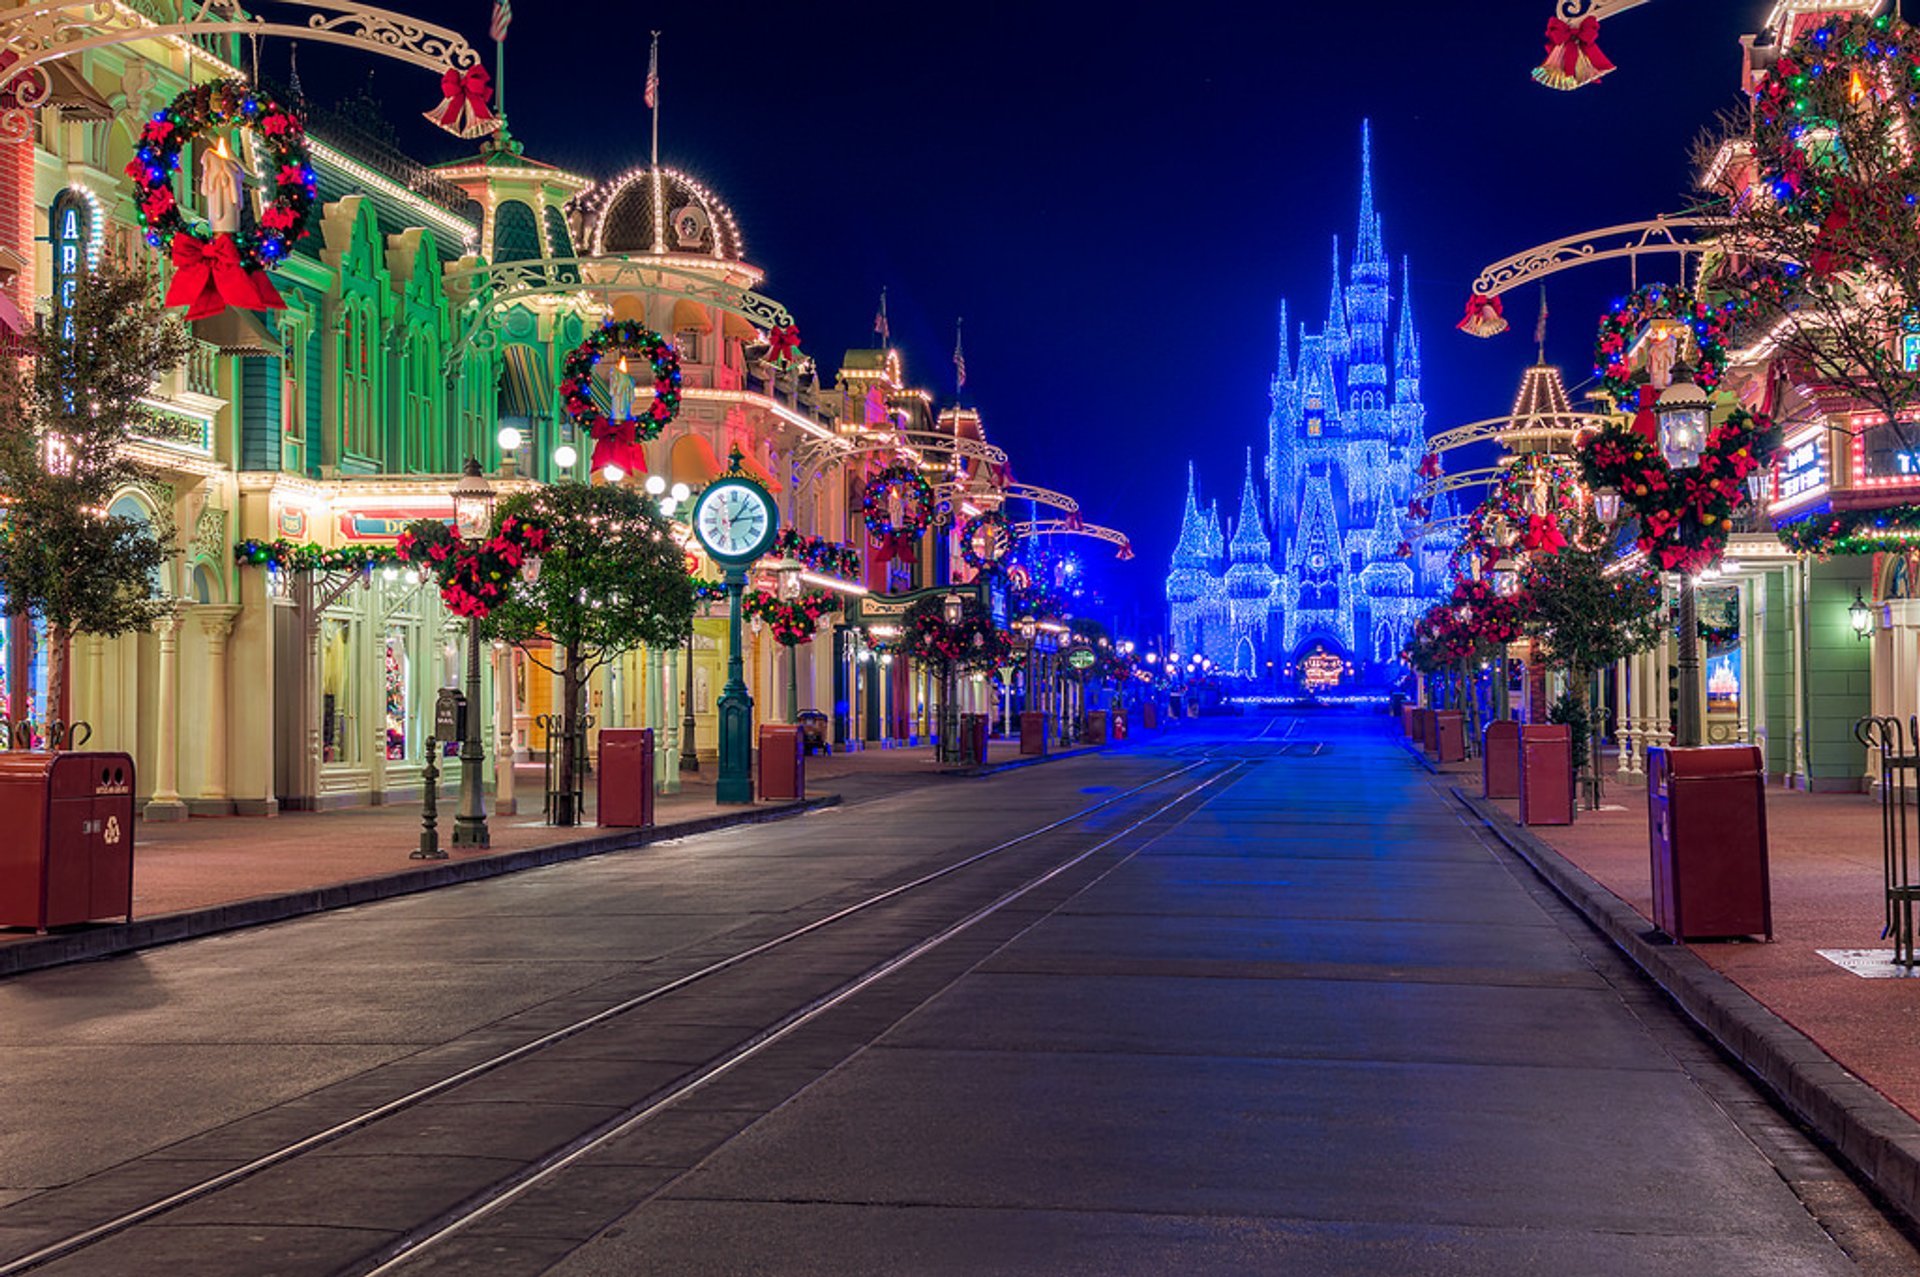 When Will Disneyland Be Decorated For Christmas 2021